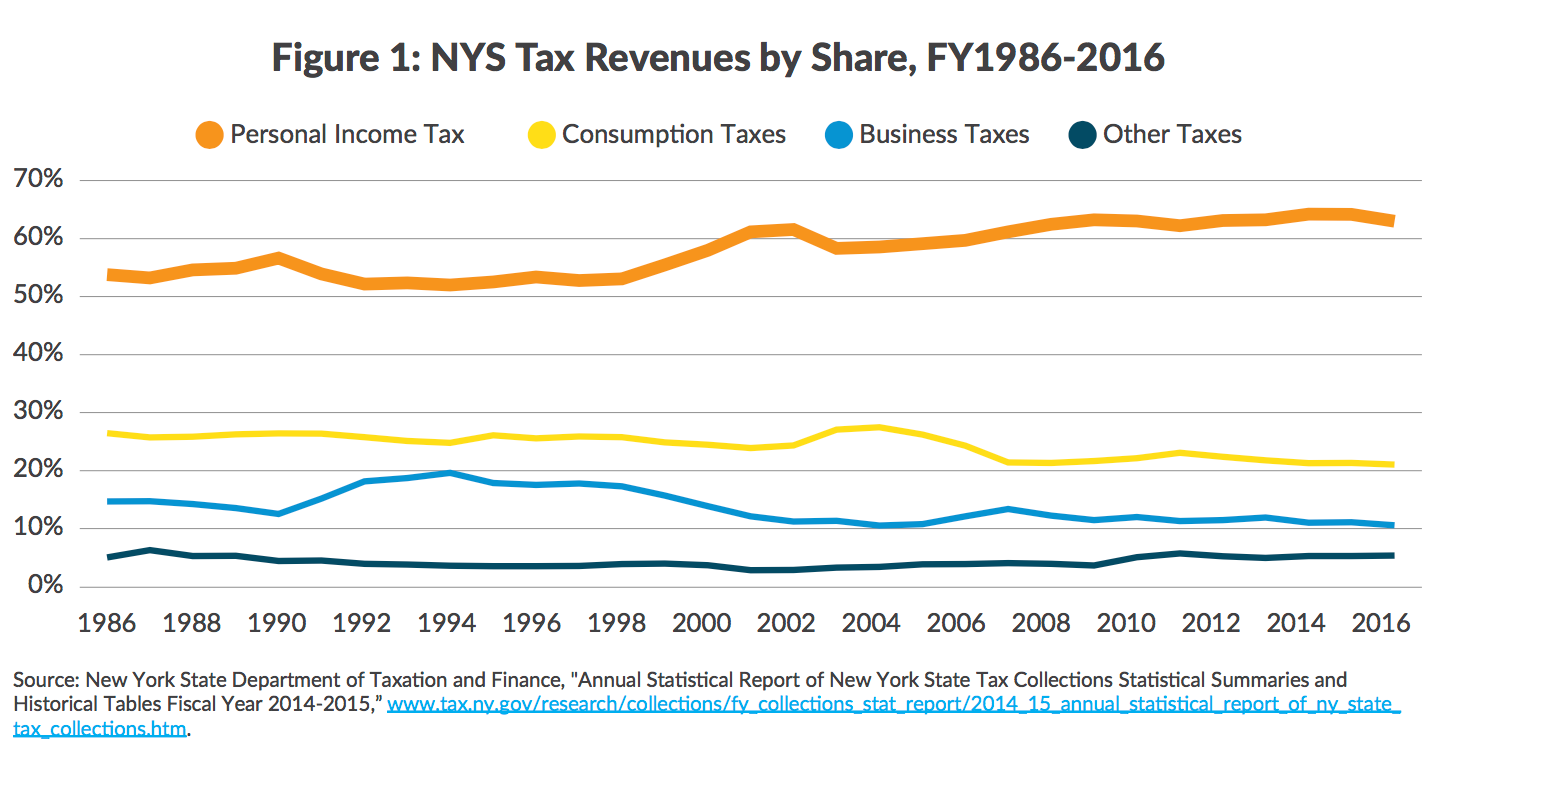 Figure 1: NYS Tax Revenues by Share, FY1986-2016